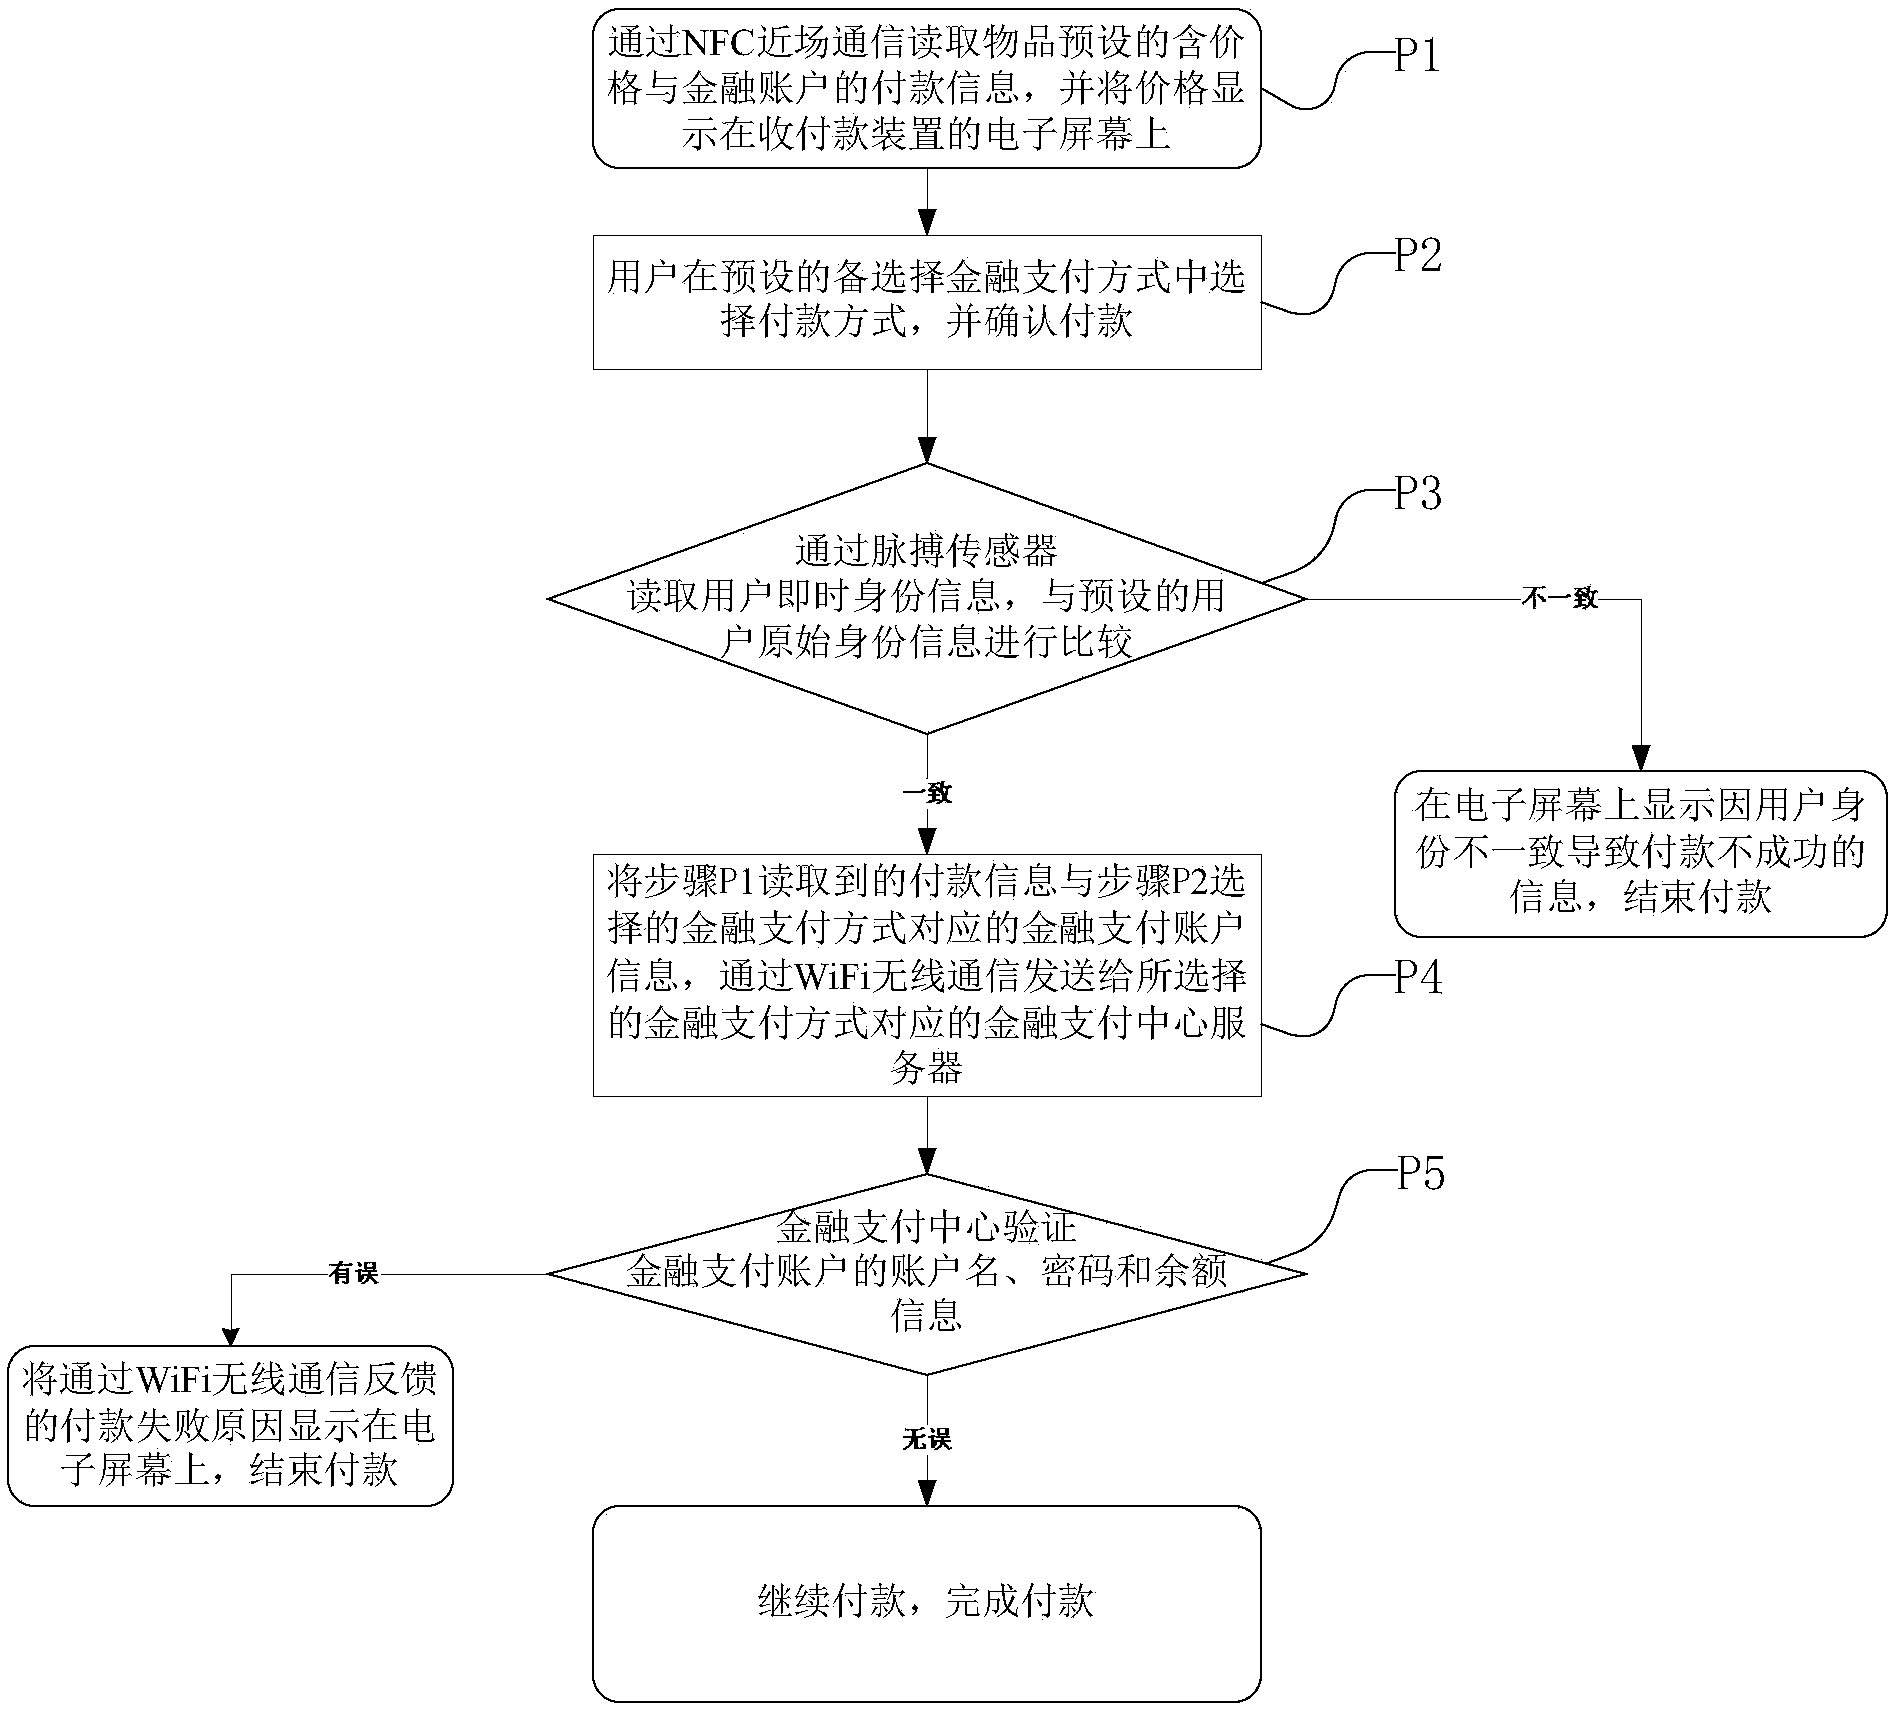 High-safety portable payment receiving device